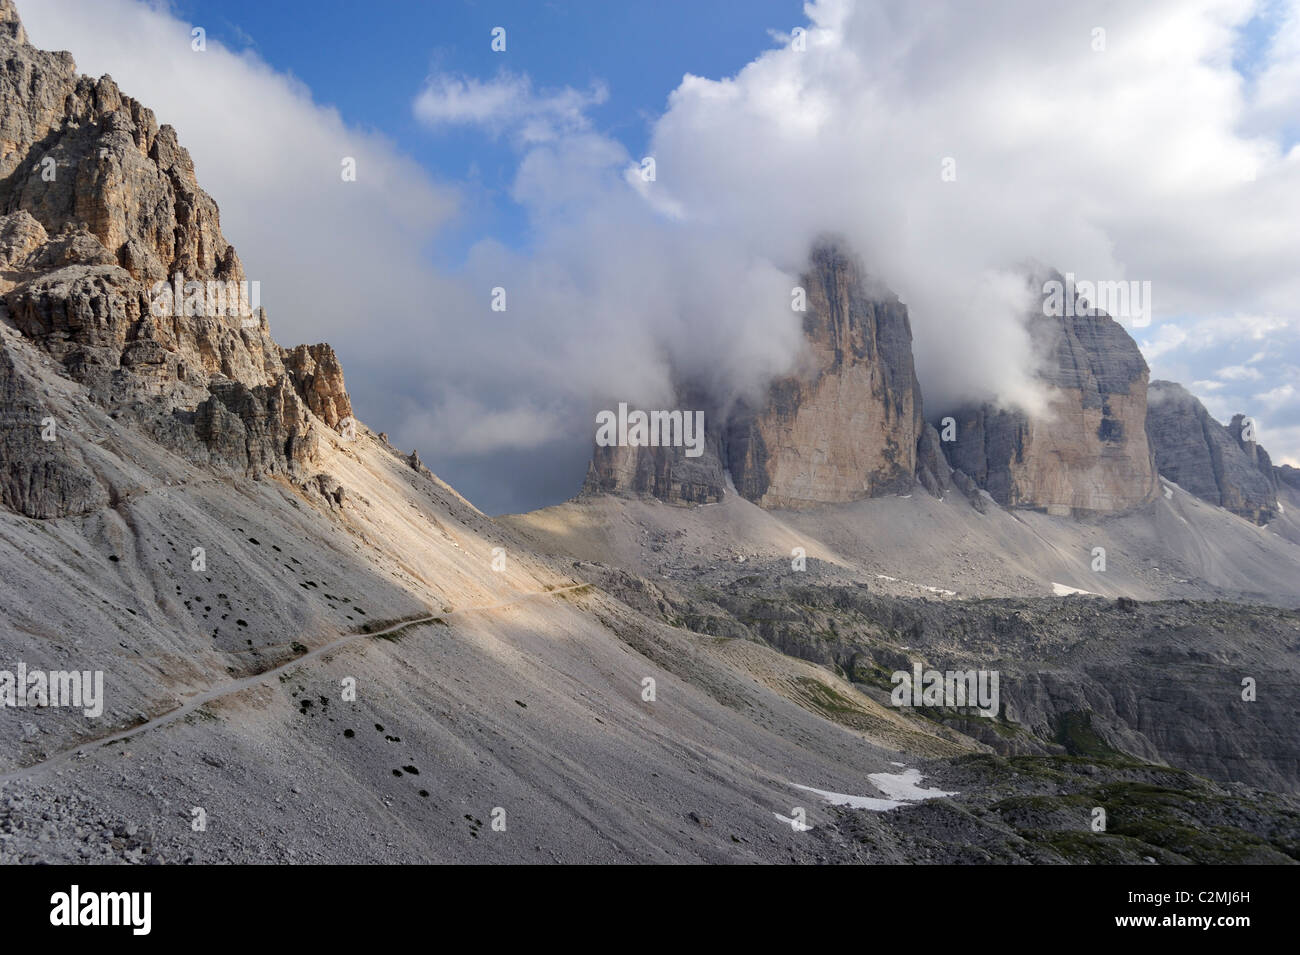 The eroded mountain peaks of the Tre Cime di Lavaredo / Drei Zinnen, Dolomites in the clouds, Italy Stock Photo